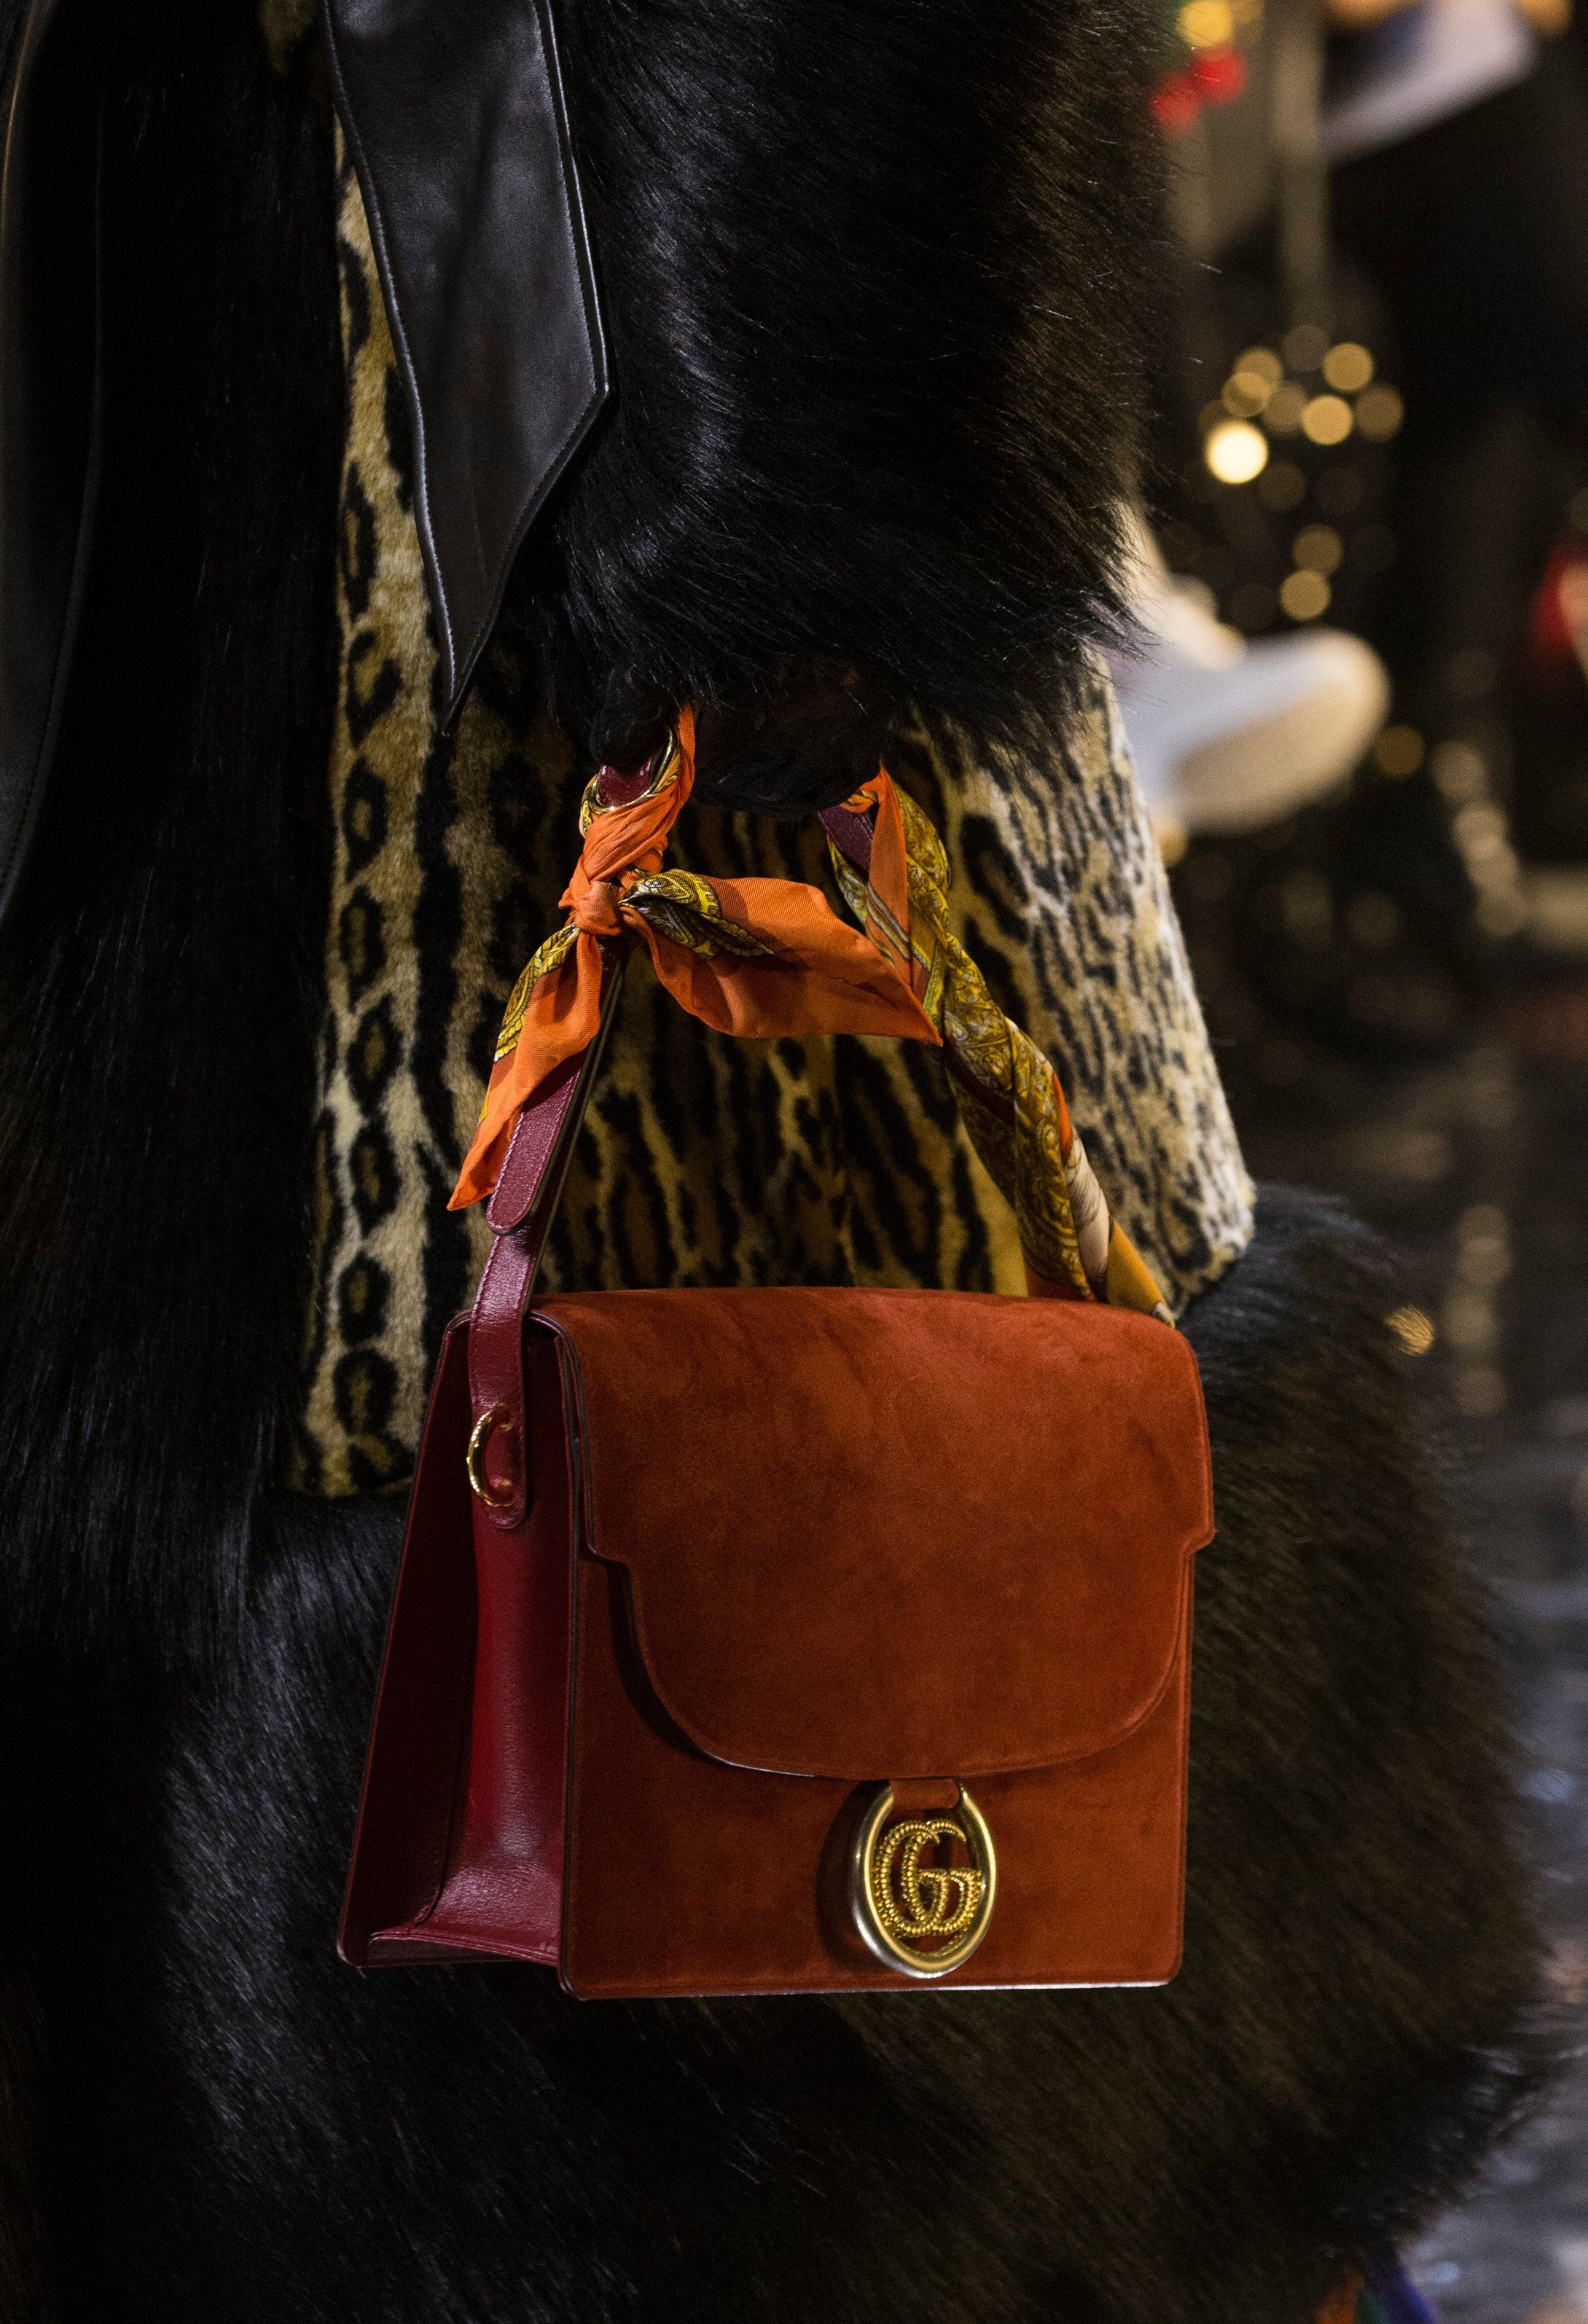 Gucci’s new Fall Winter bag collection draws inspiration from the house archives dating back to the 1970s.